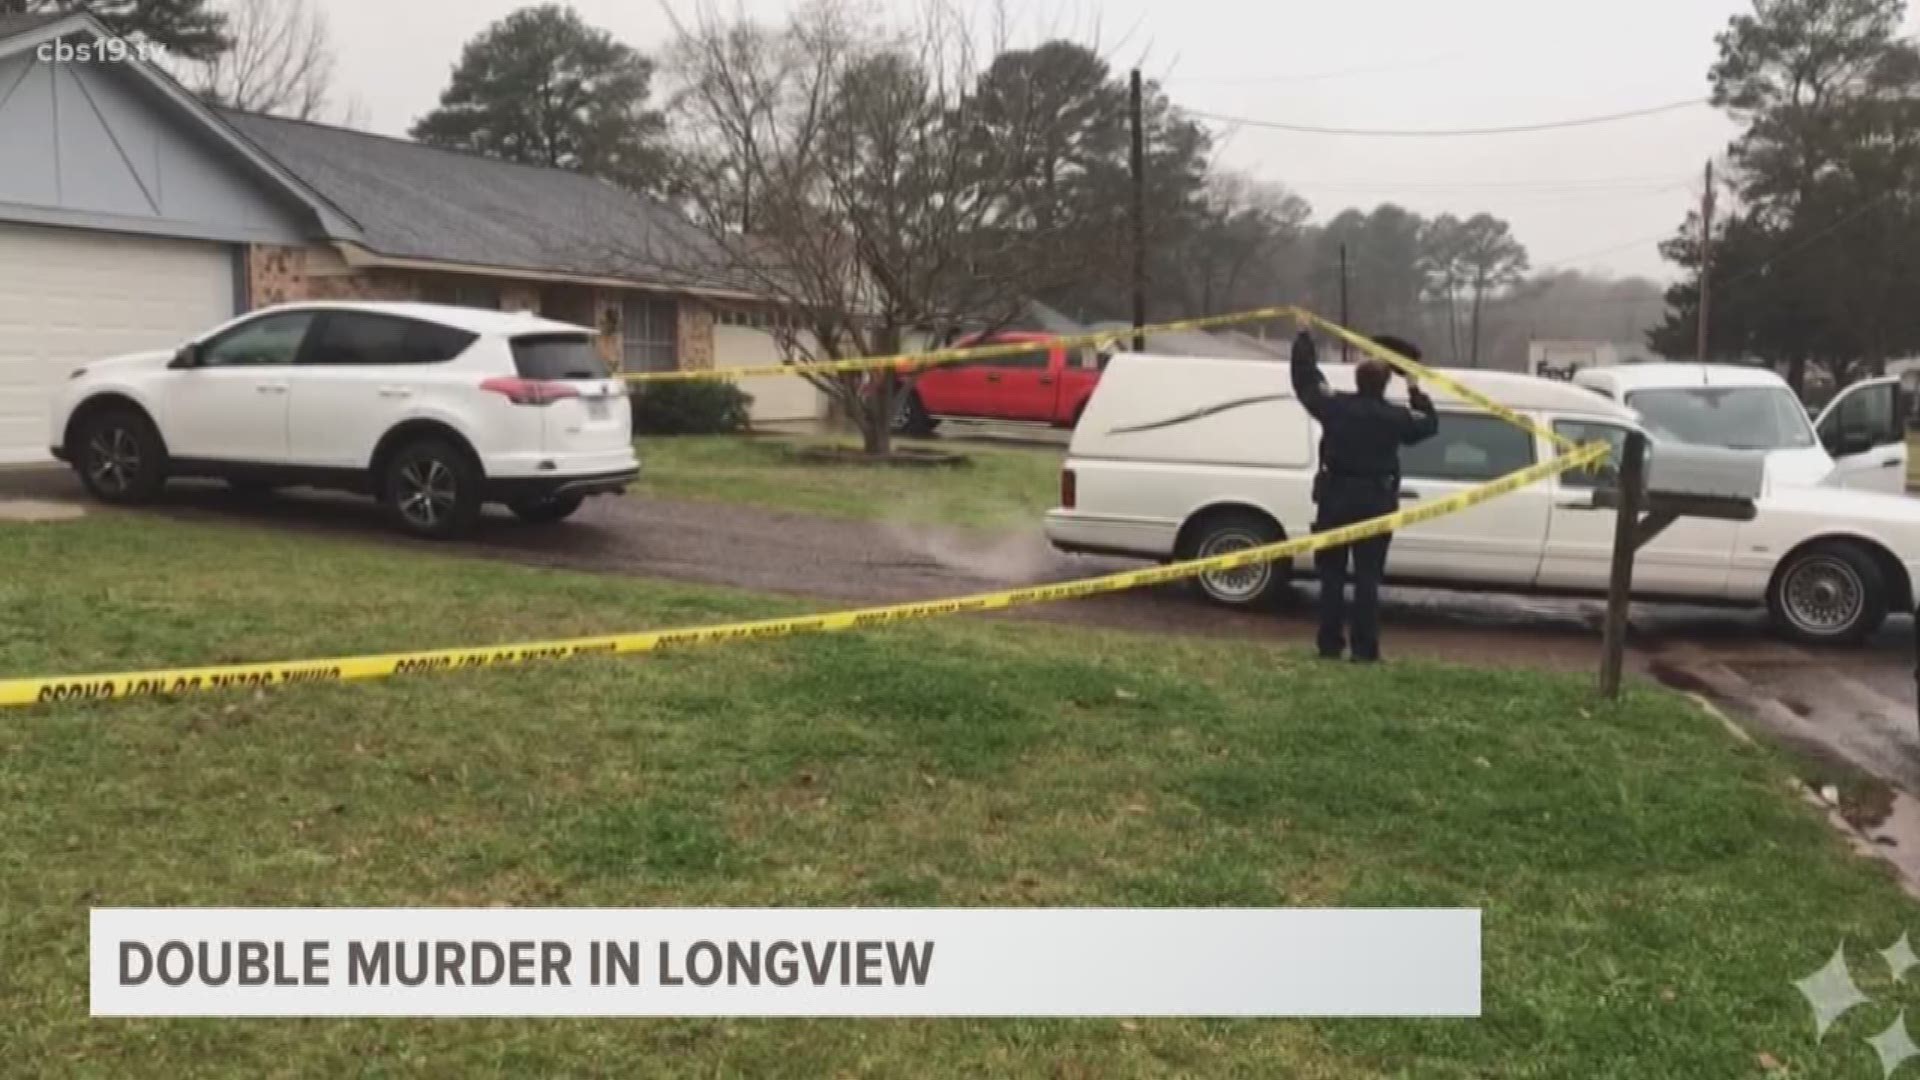 Longview police believe a domestic dispute led to a double-homicide outside a home on Loring Lane early Tuesday morning.